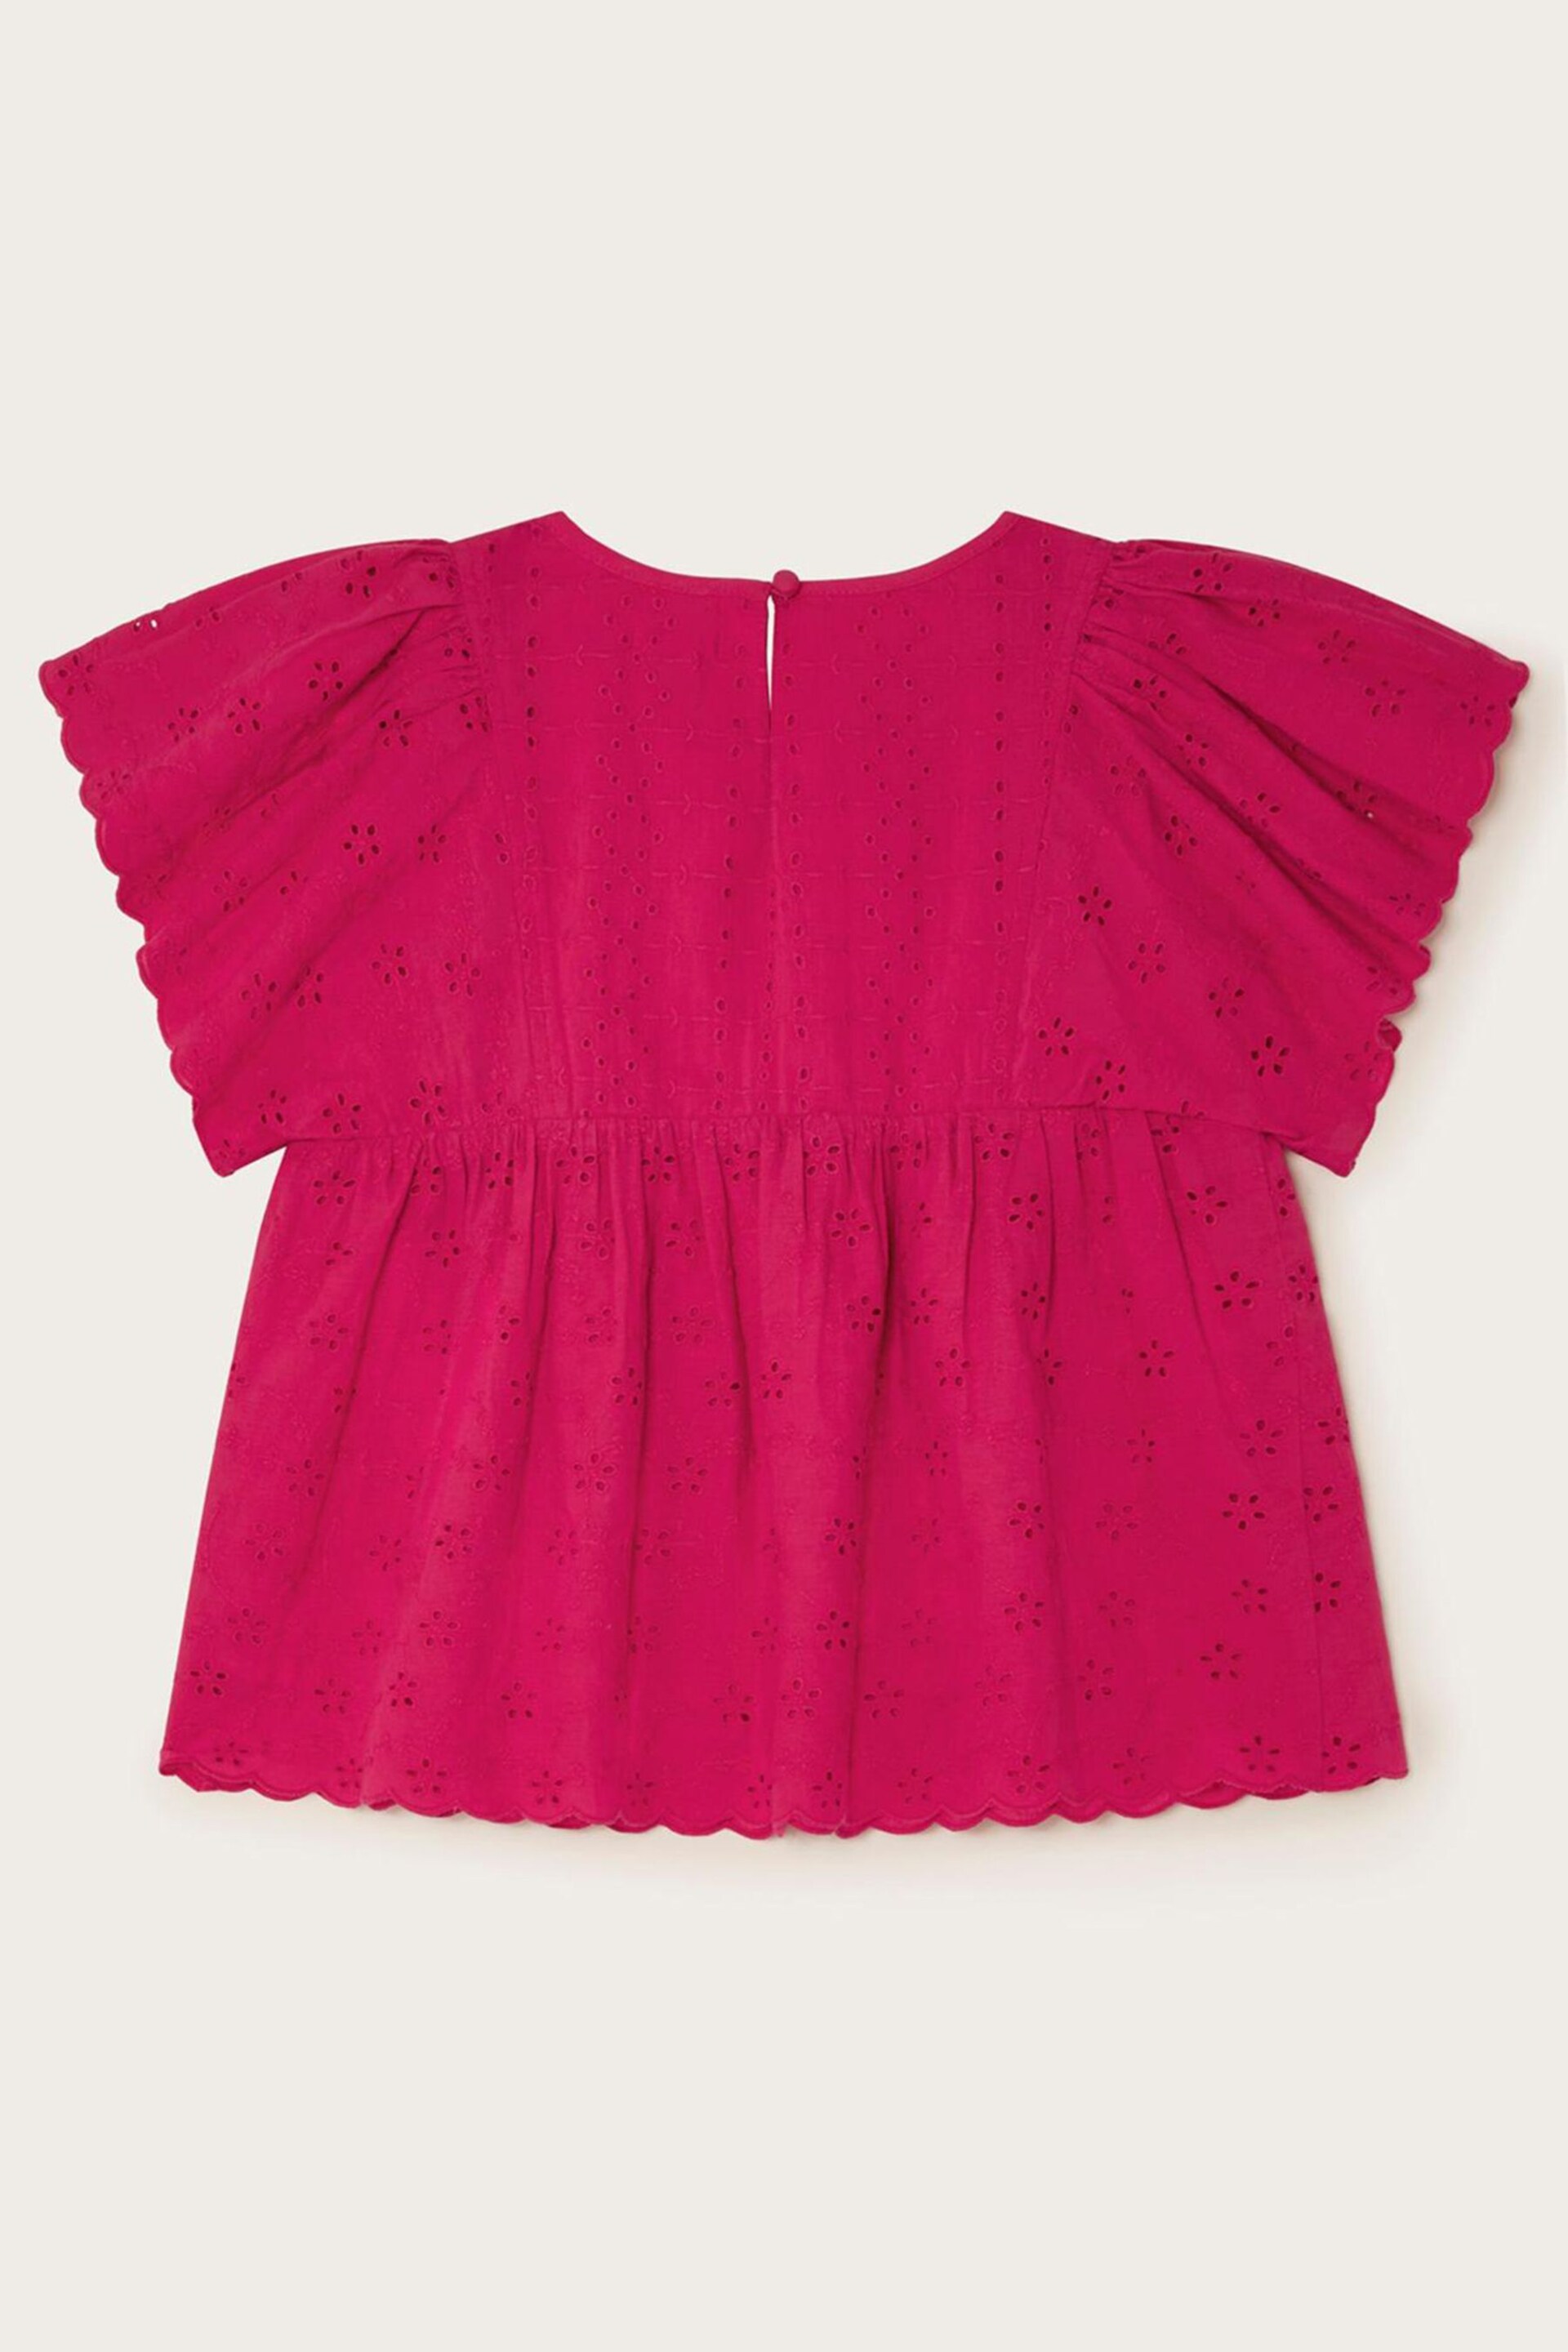 Monsoon Pink Broderie Blouse - Image 2 of 3